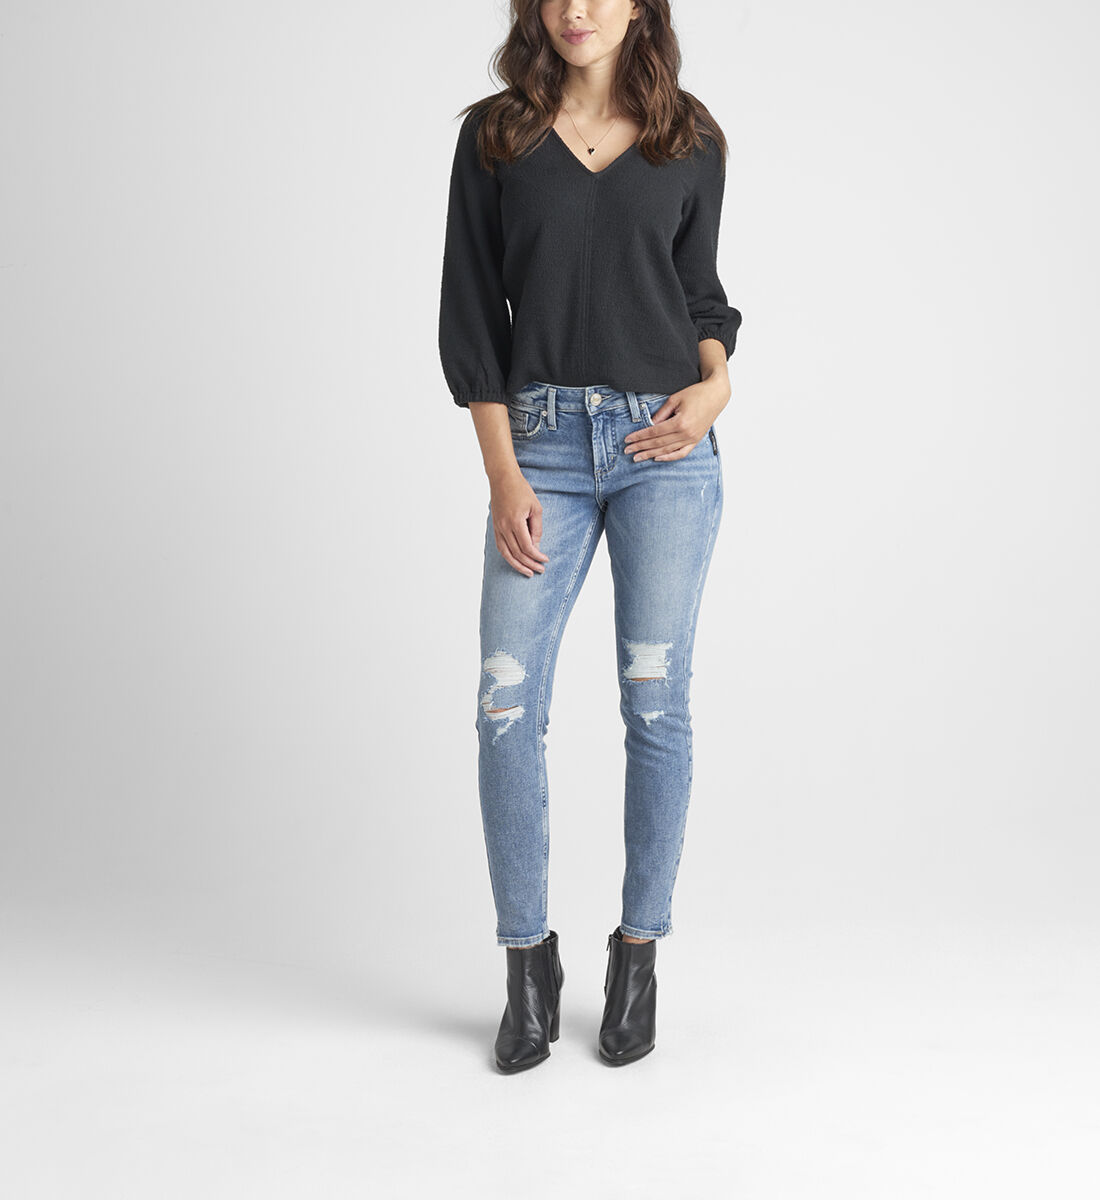 Elyse Mid Rise Skinny Jeans Front